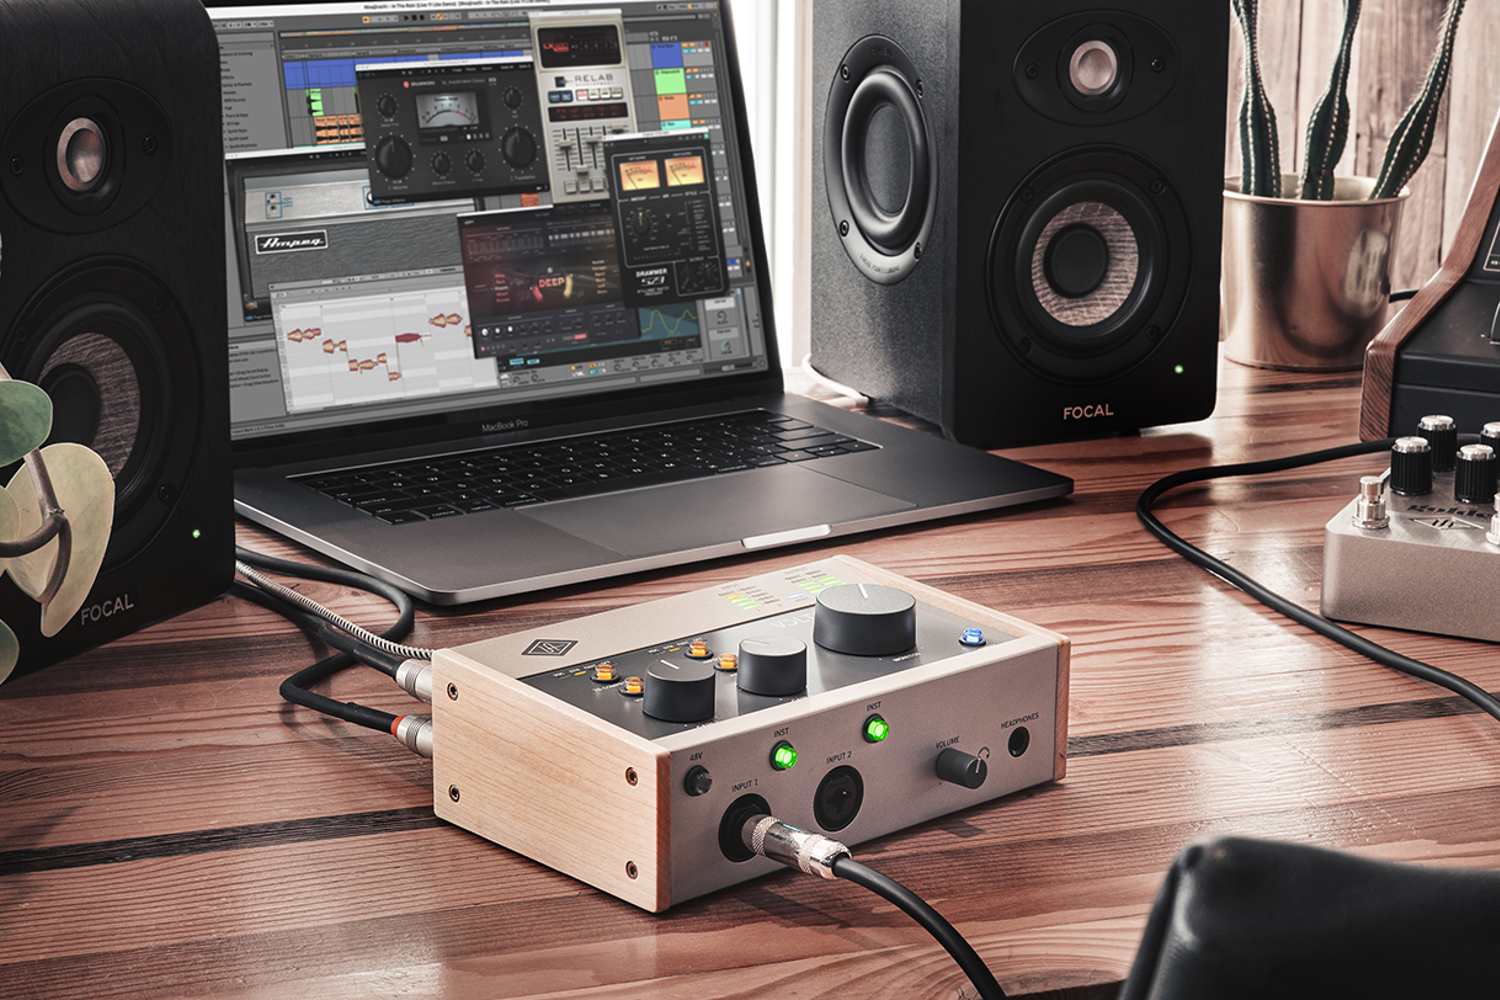 Universal Audio Volt 276 audio interface on desk with music production equipment